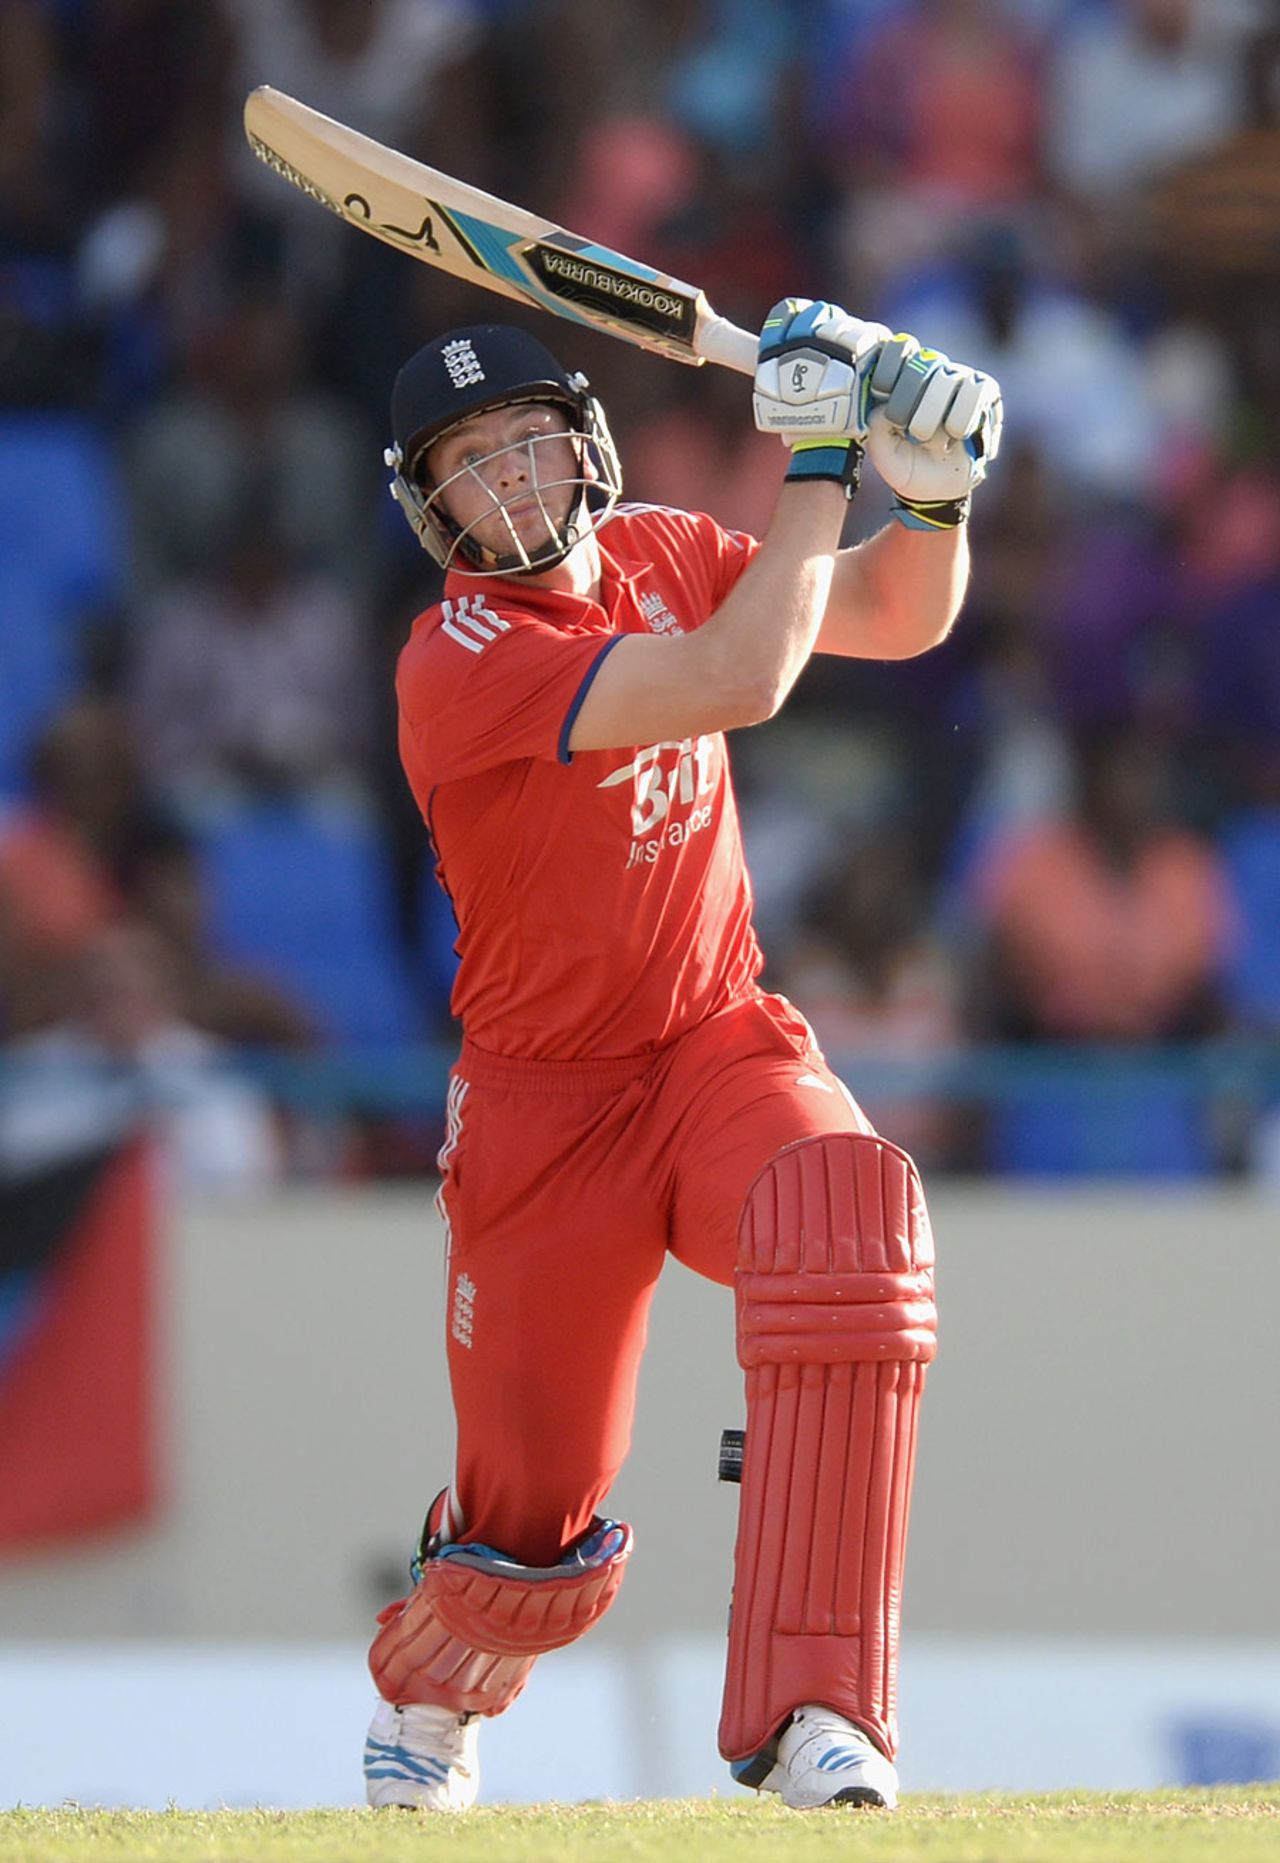 Jos Buttler could only find mid-off, West Indies v England, 1st ODI, North Sound, February 28, 2014